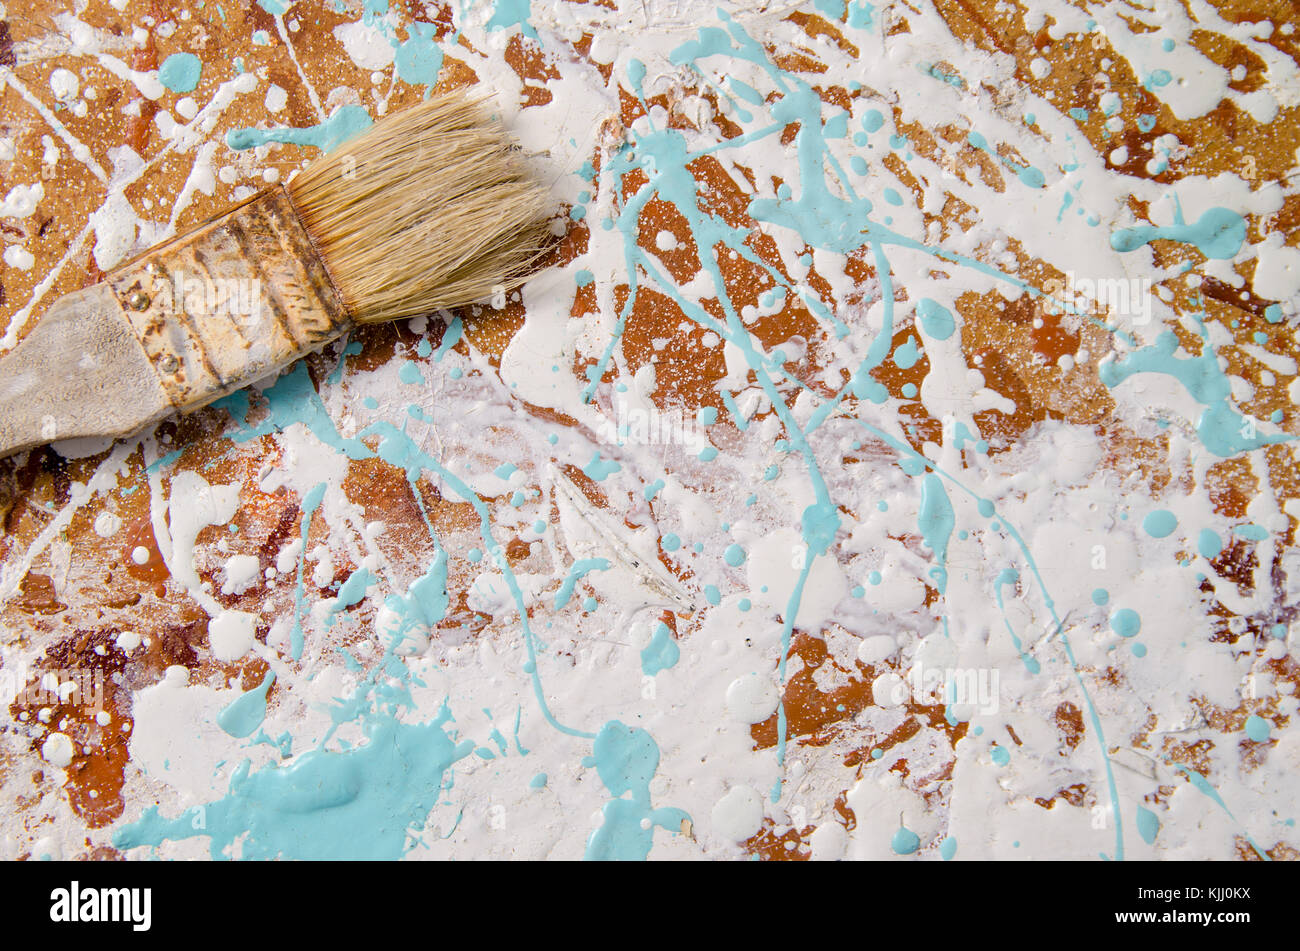 a brush on a hardboard stained with paint background Stock Photo